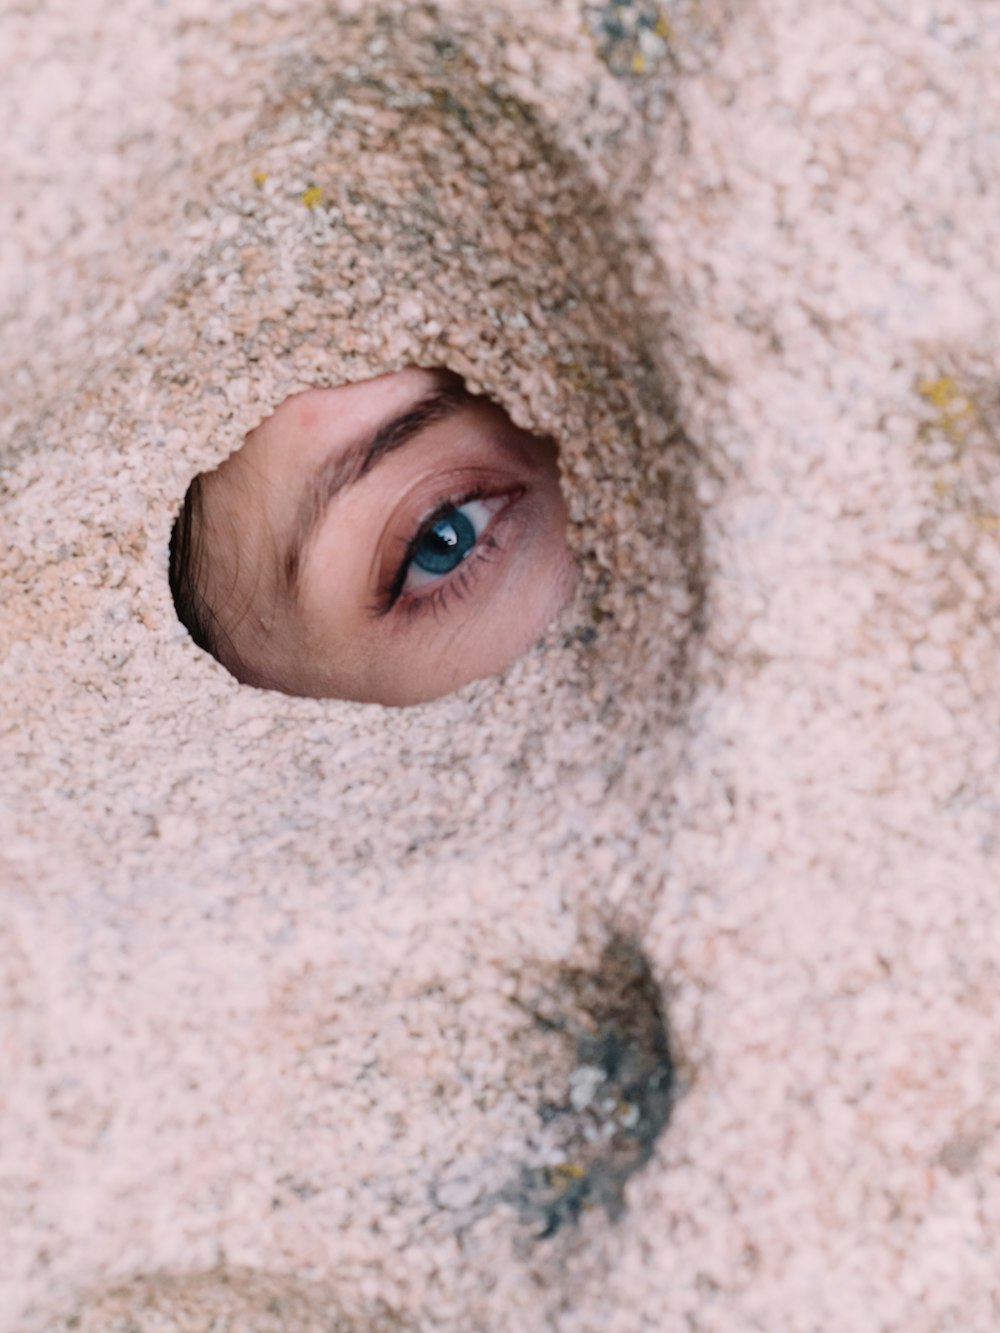 a close up of a person's eye through a hole in the sand